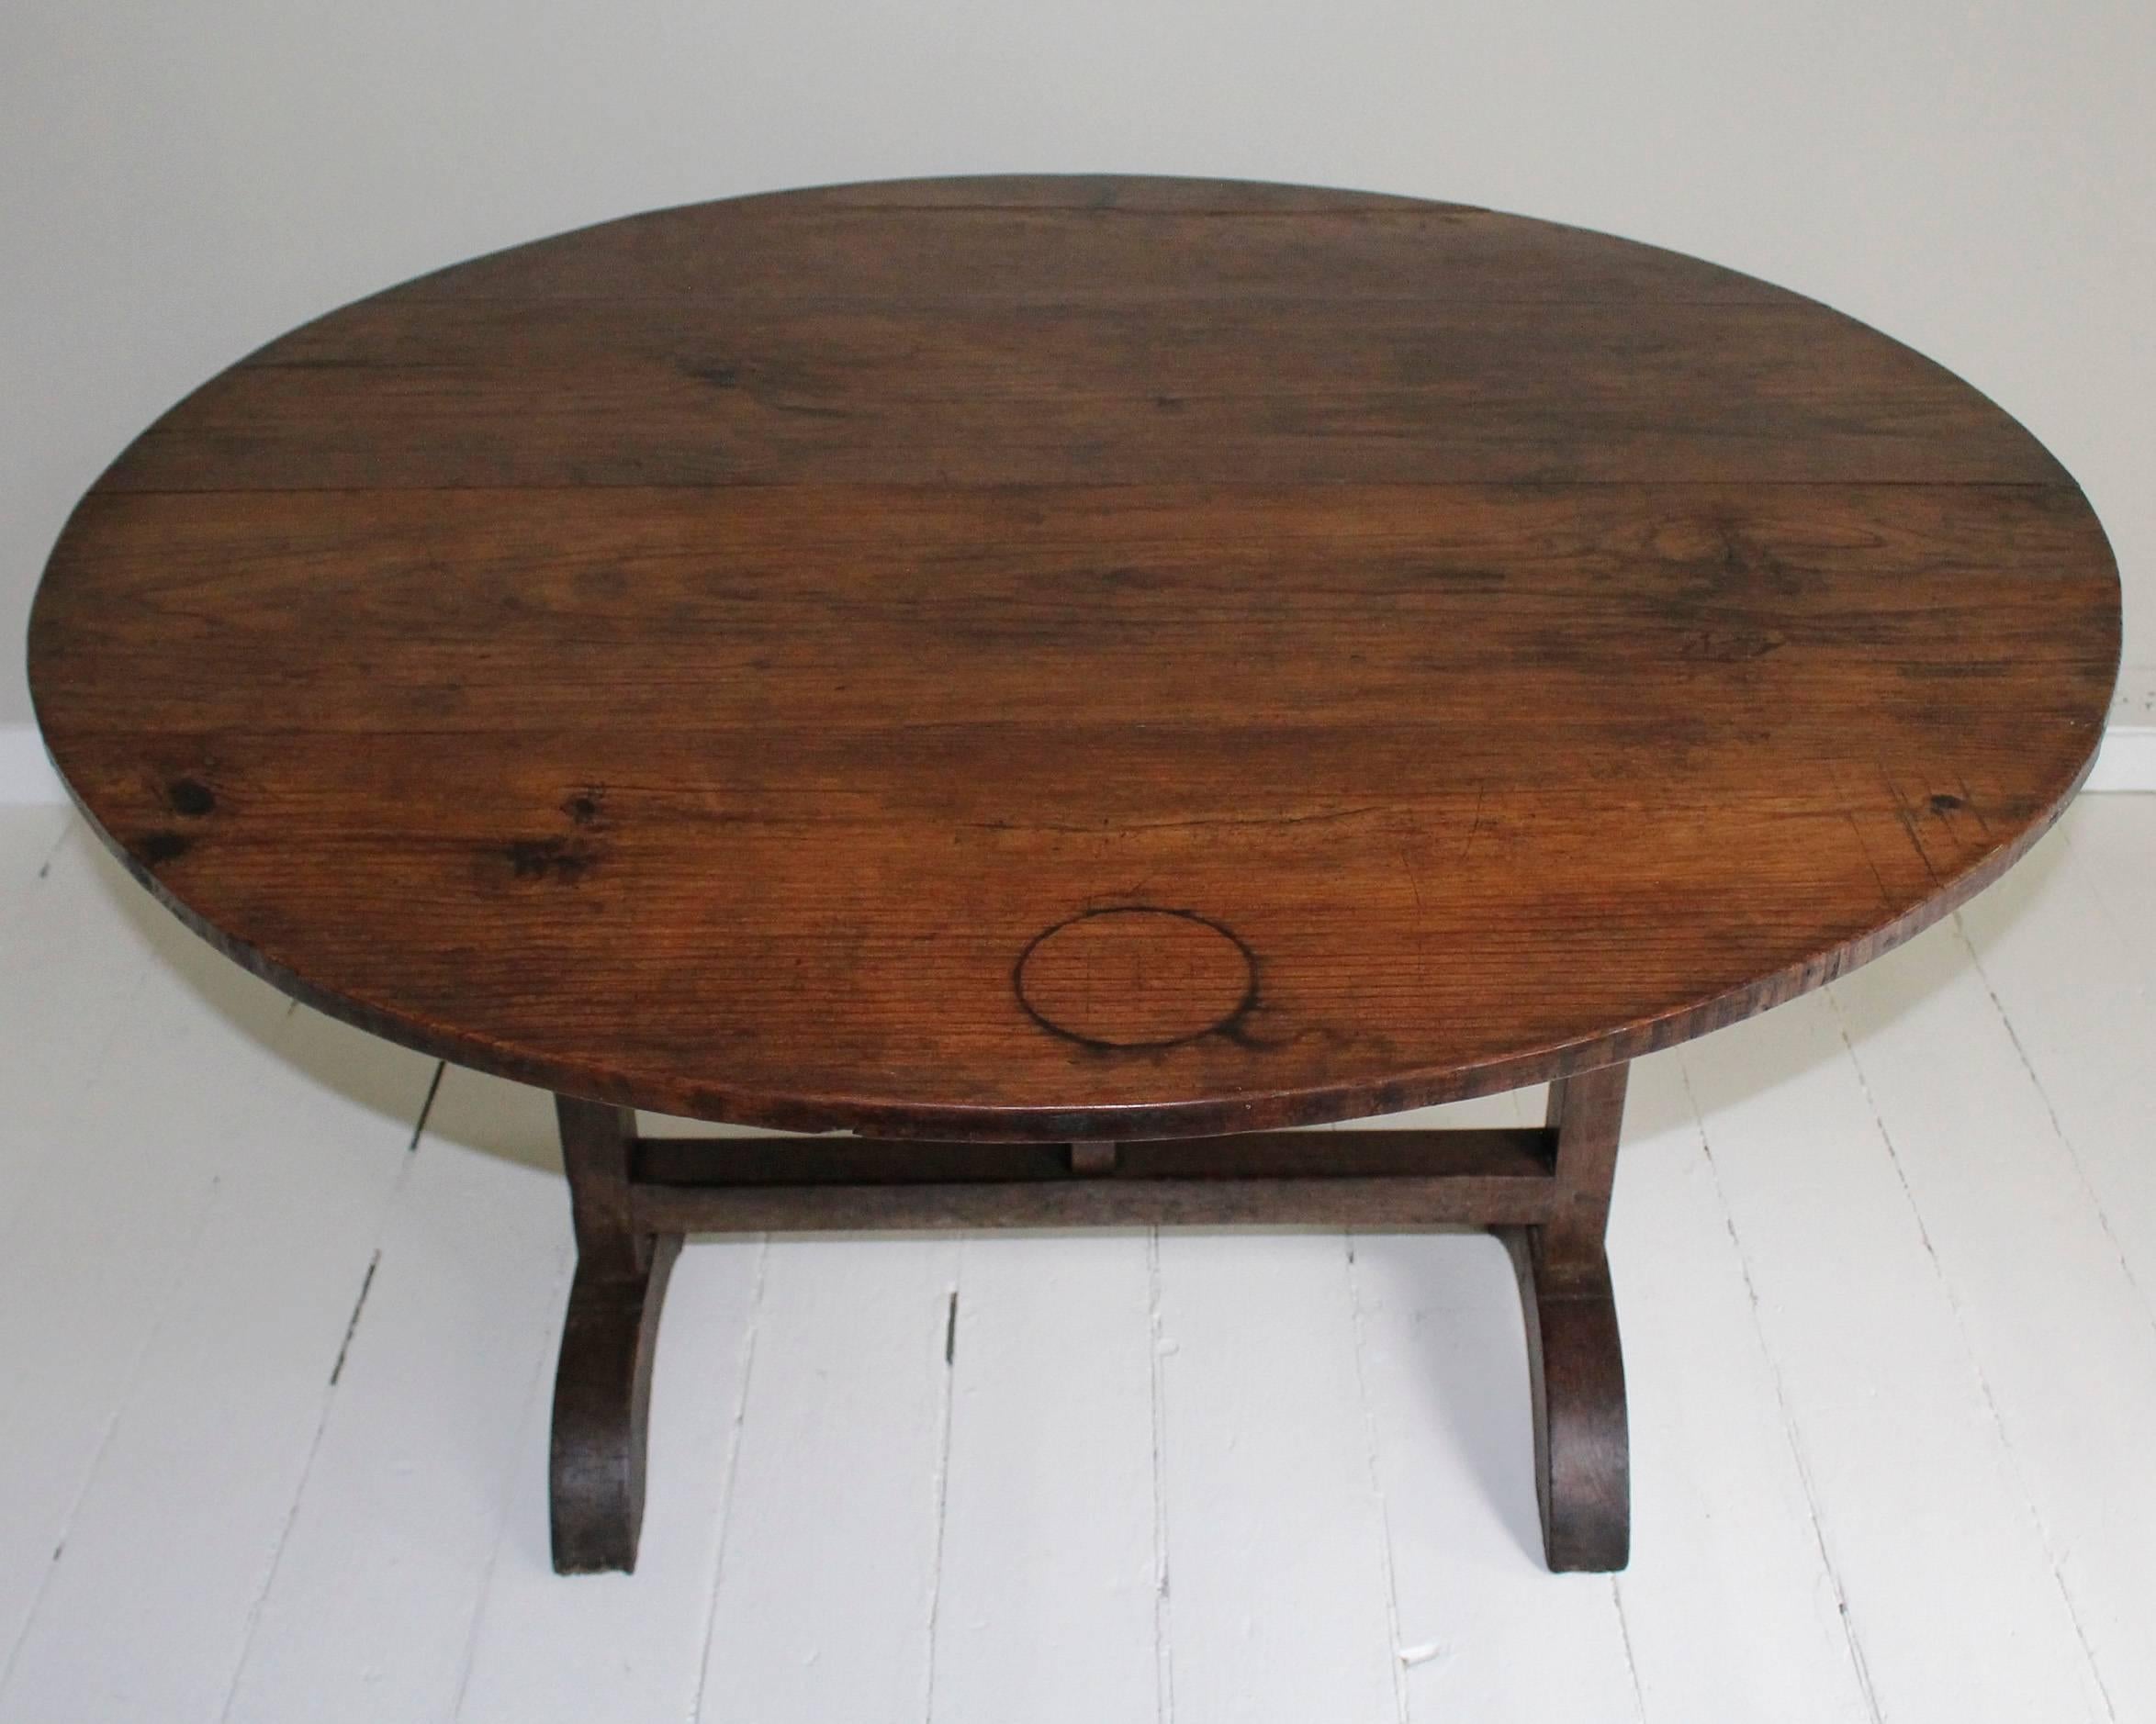 19th century French wine-tasting tilt-top table, round in shape, raised on trestle base with wishbone support. Stands 50.25" tall in upright folded position. Makes a perfect small breakfast table, library table or center hall table.